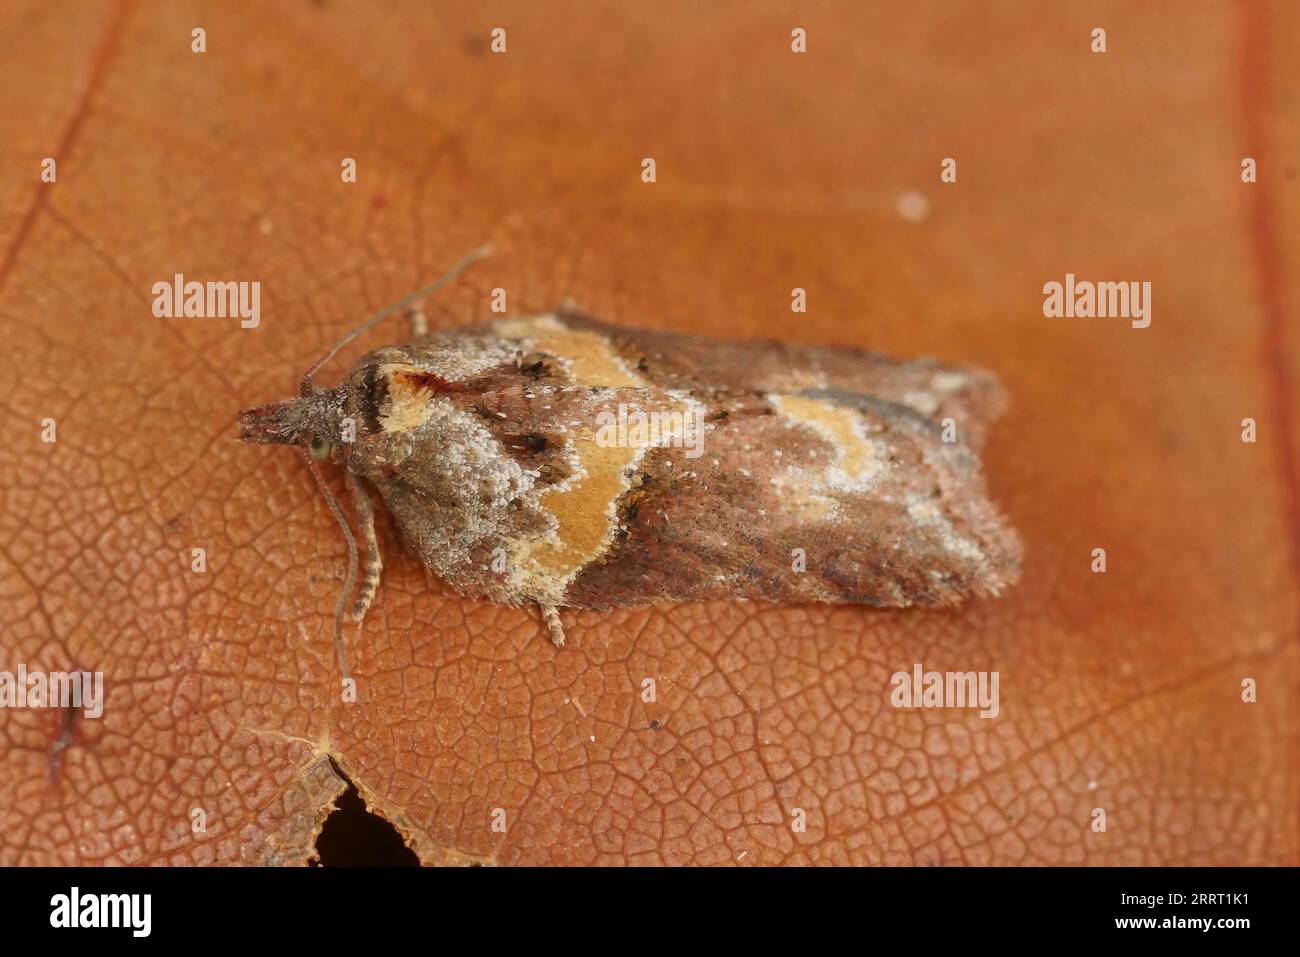 Natural closeup of the small Sallow Button moth, Acleris hastiana on a piece of wood Stock Photo